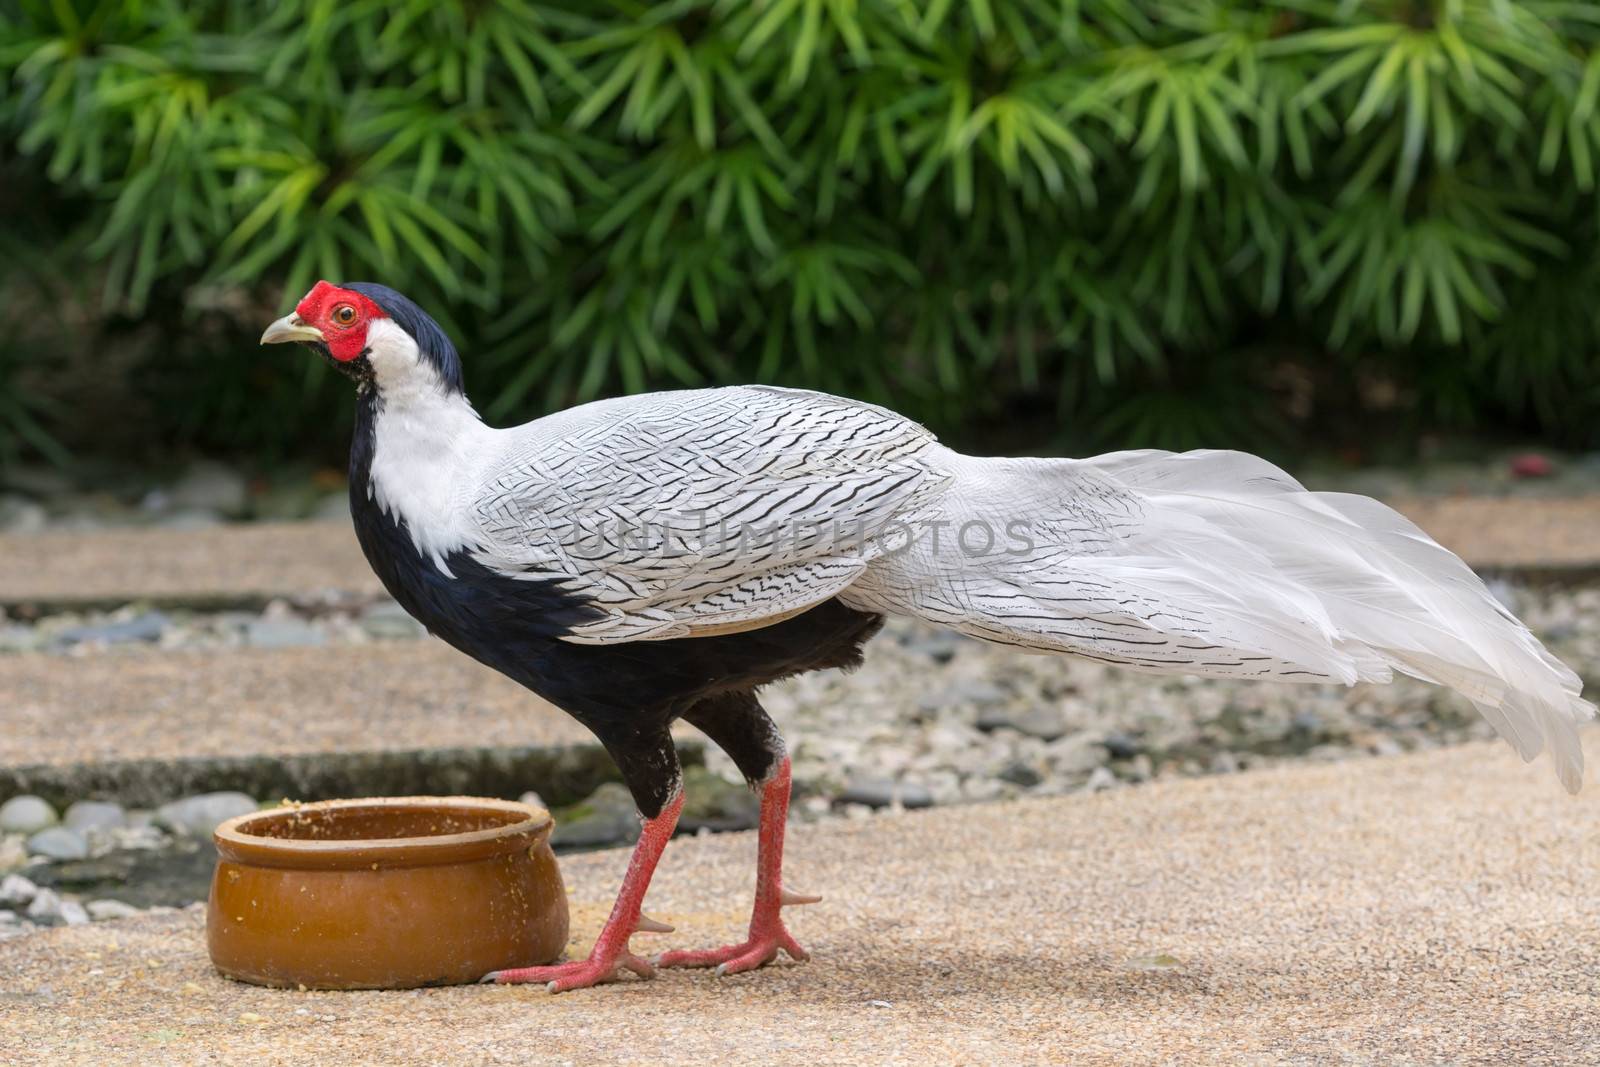 Male silver pheasant (Lophura nycthemera) near feeder and with green plants on background